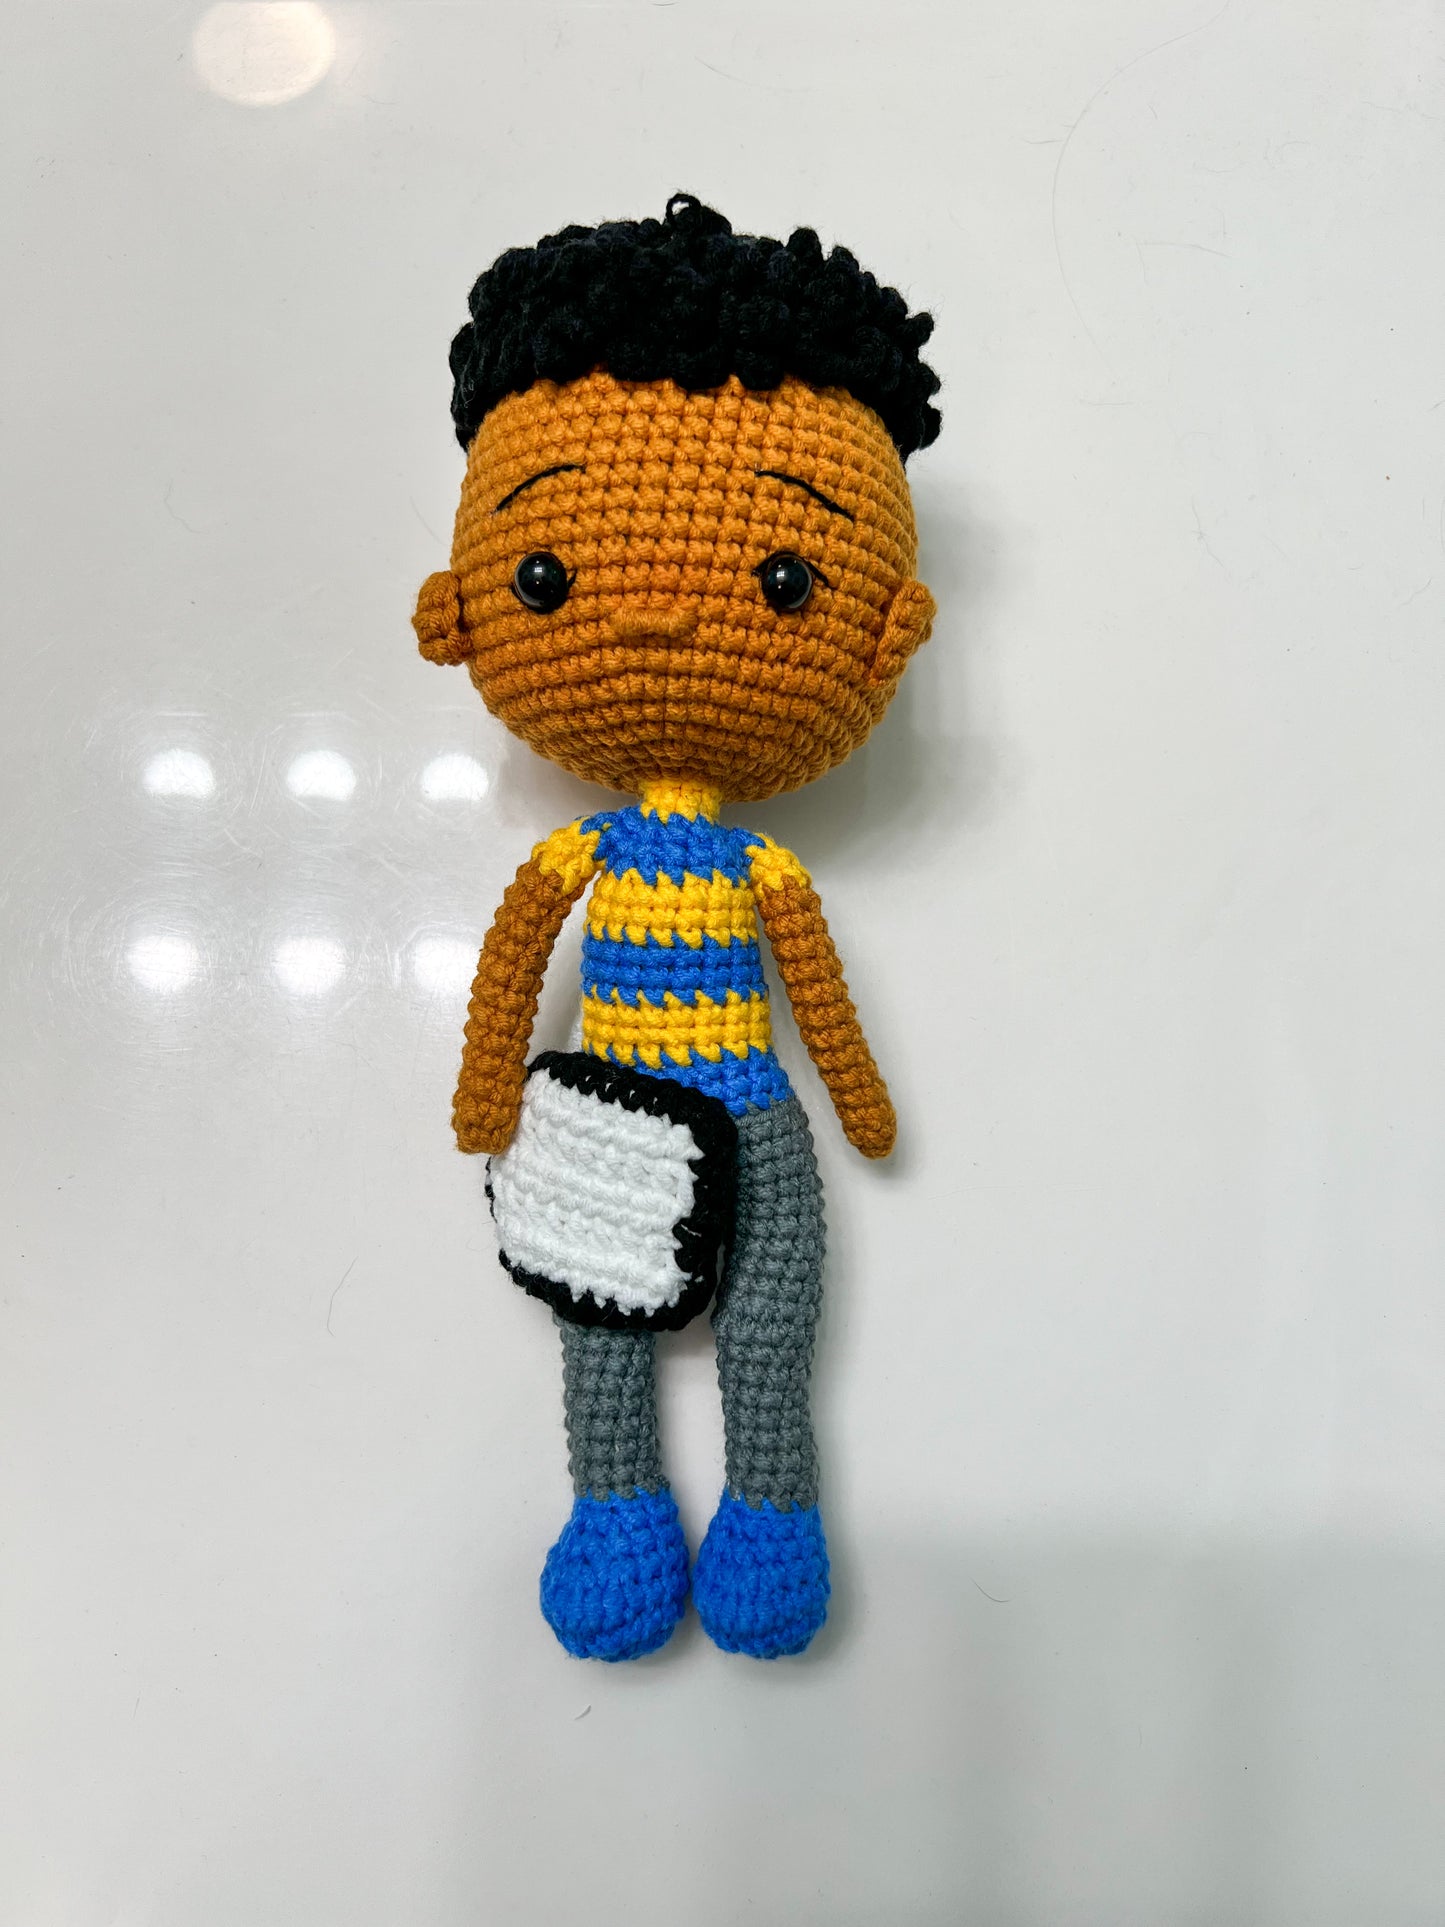 Sy and Margo Crocheted Dolls